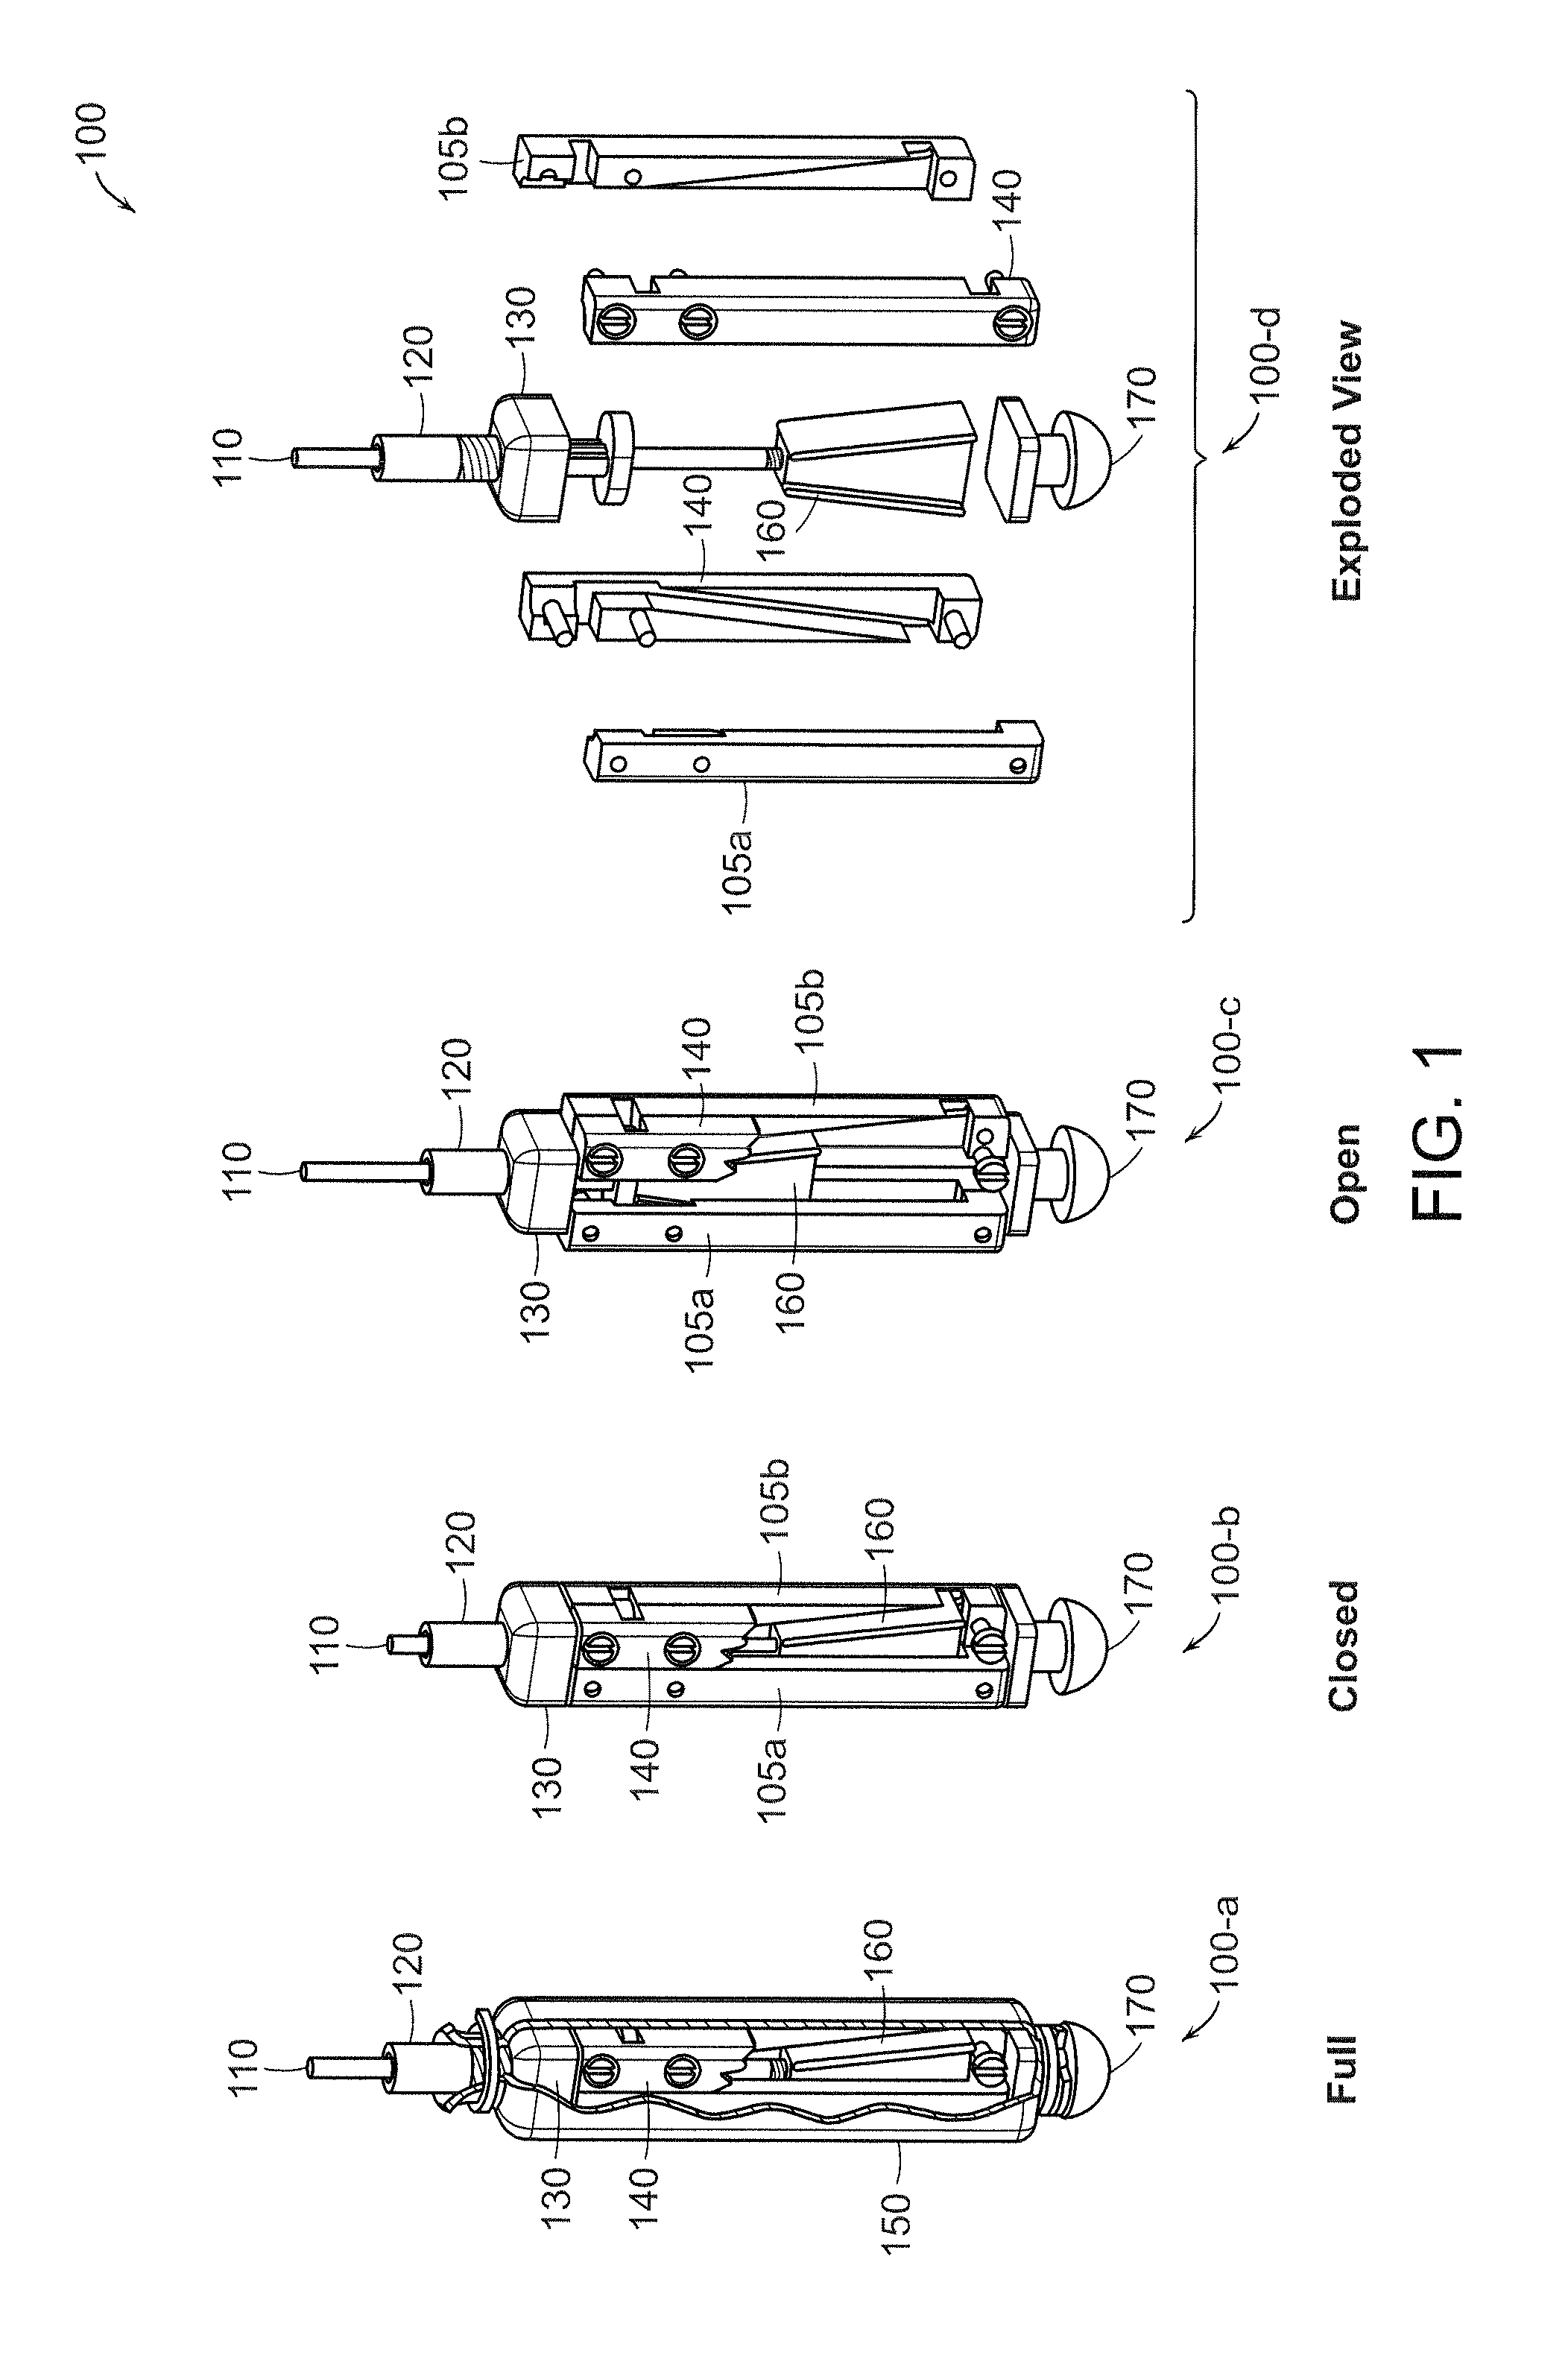 Method and apparatus for penetrating particulate substrates